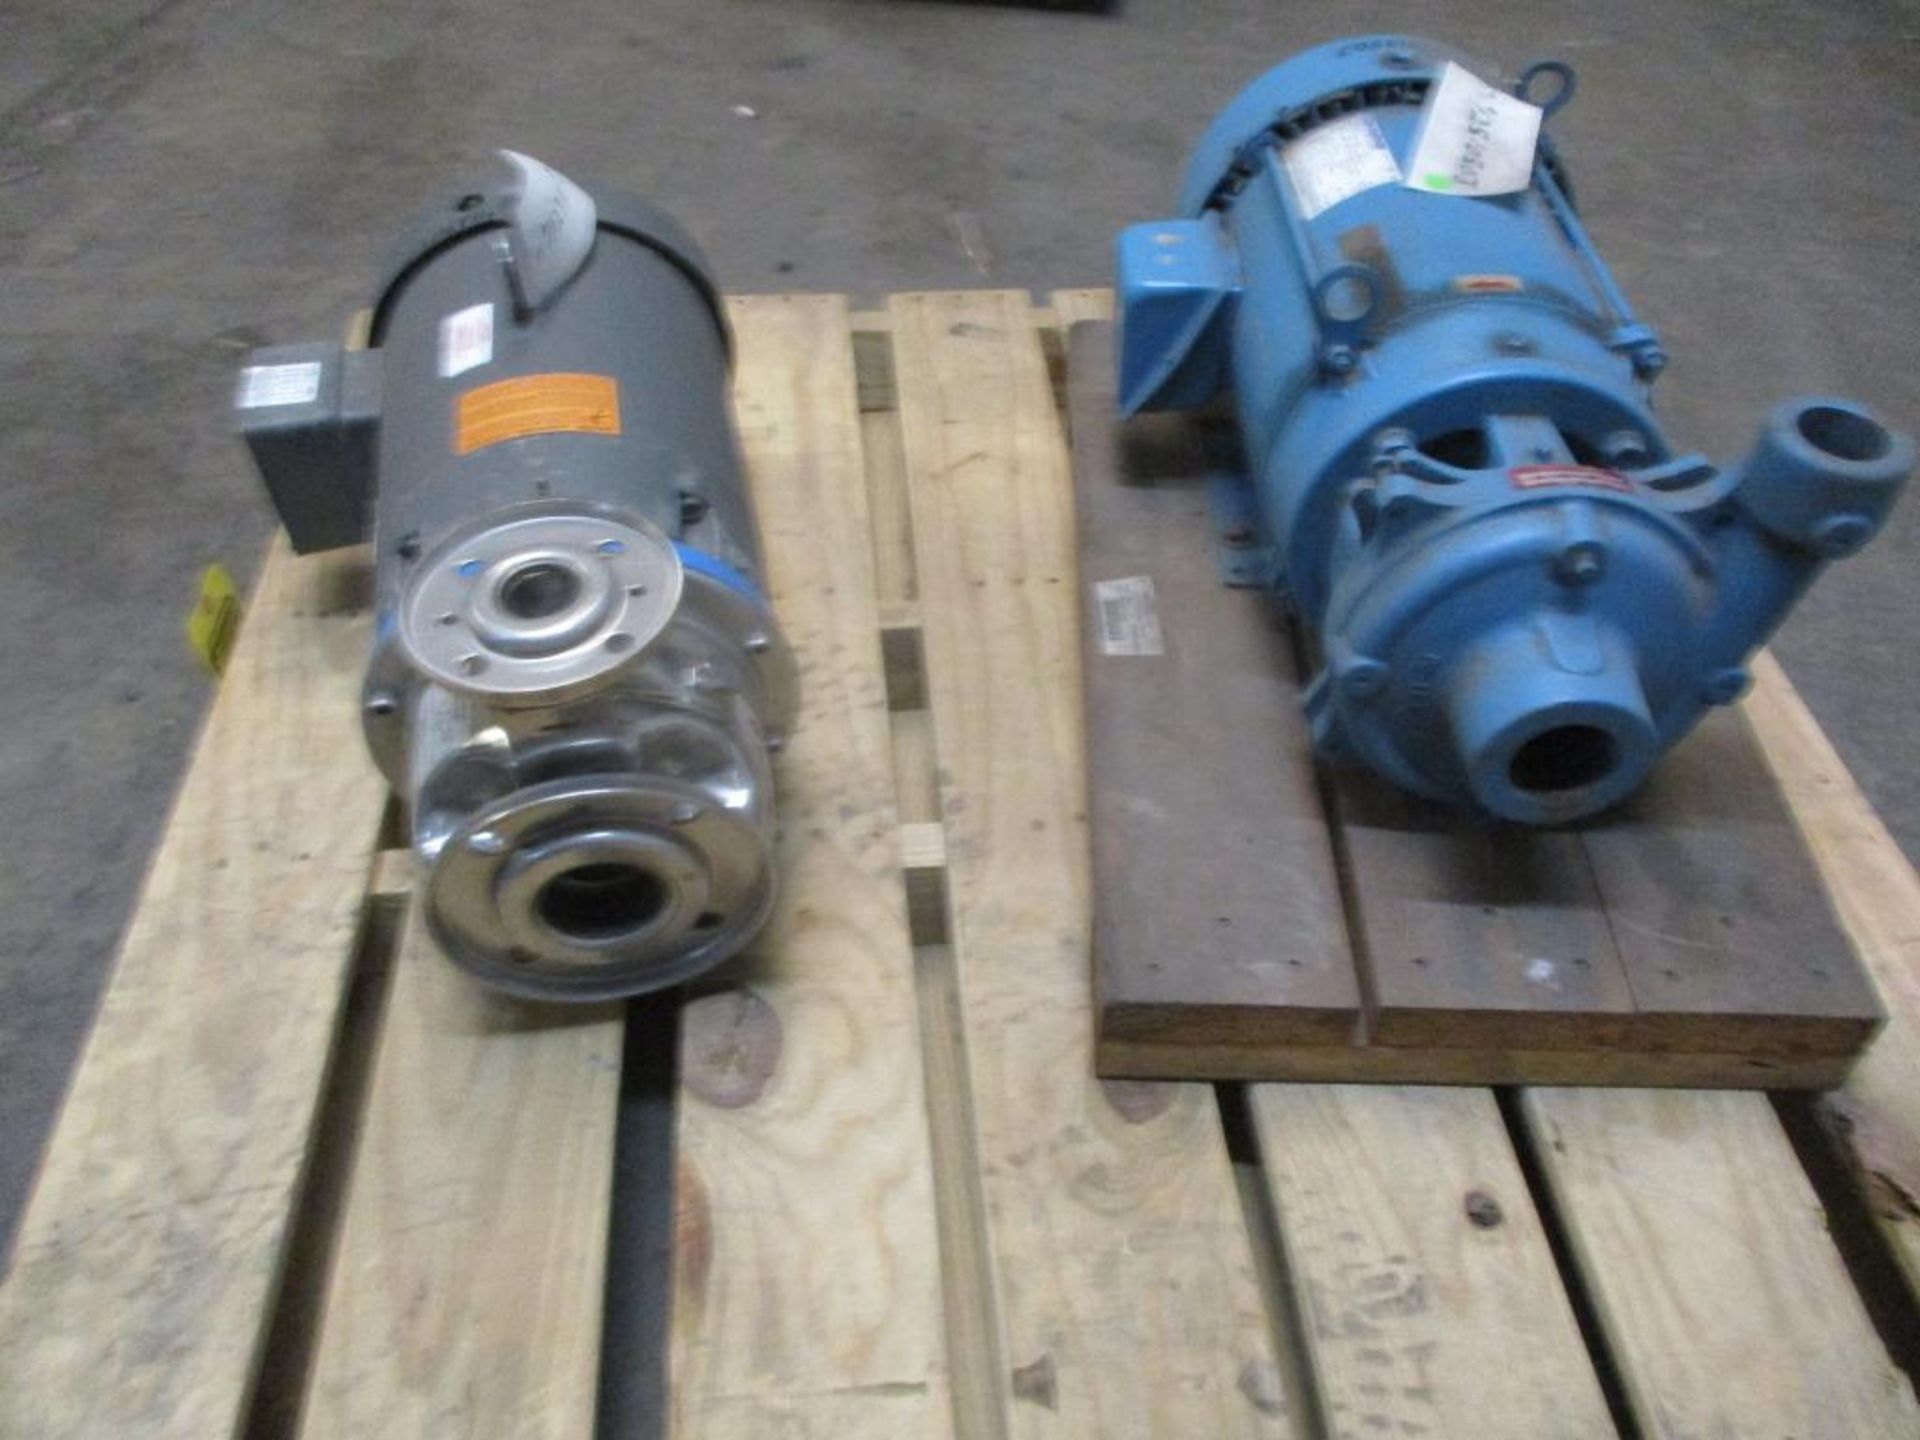 Goulds G&L 1-1/2 x 2-1/2-6 Stainless 10 HP Pump, Mepco 1-1/2 x 2 Iron 7-1/2 HP Pump (New) - Image 4 of 4